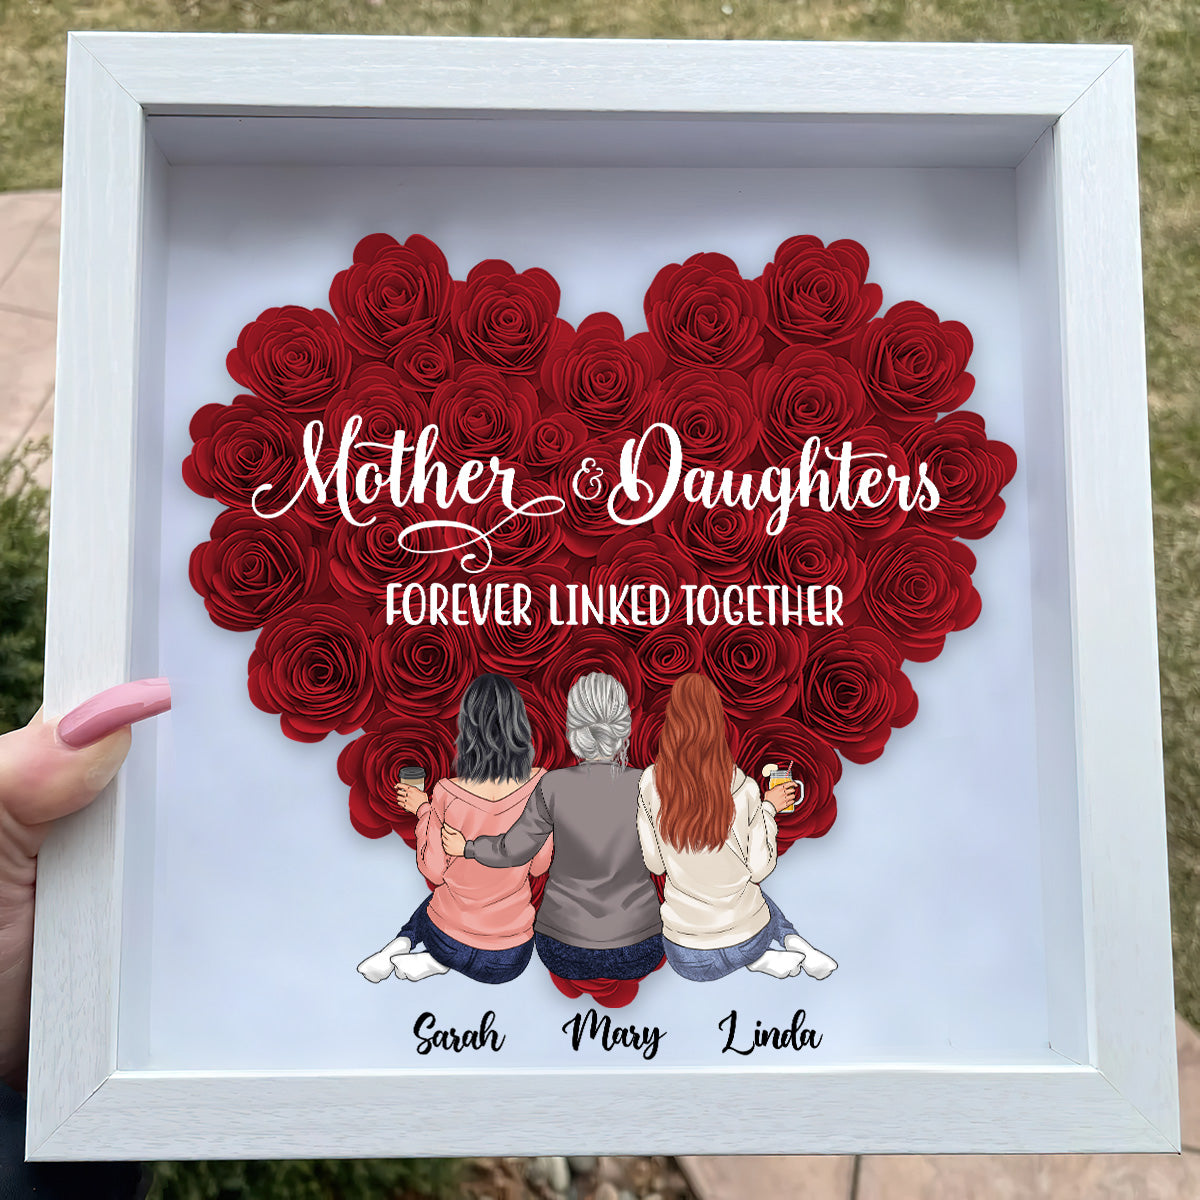 Mother And Daughters - Gift for mom, daughter, son - Personalized Flower Shadow Box